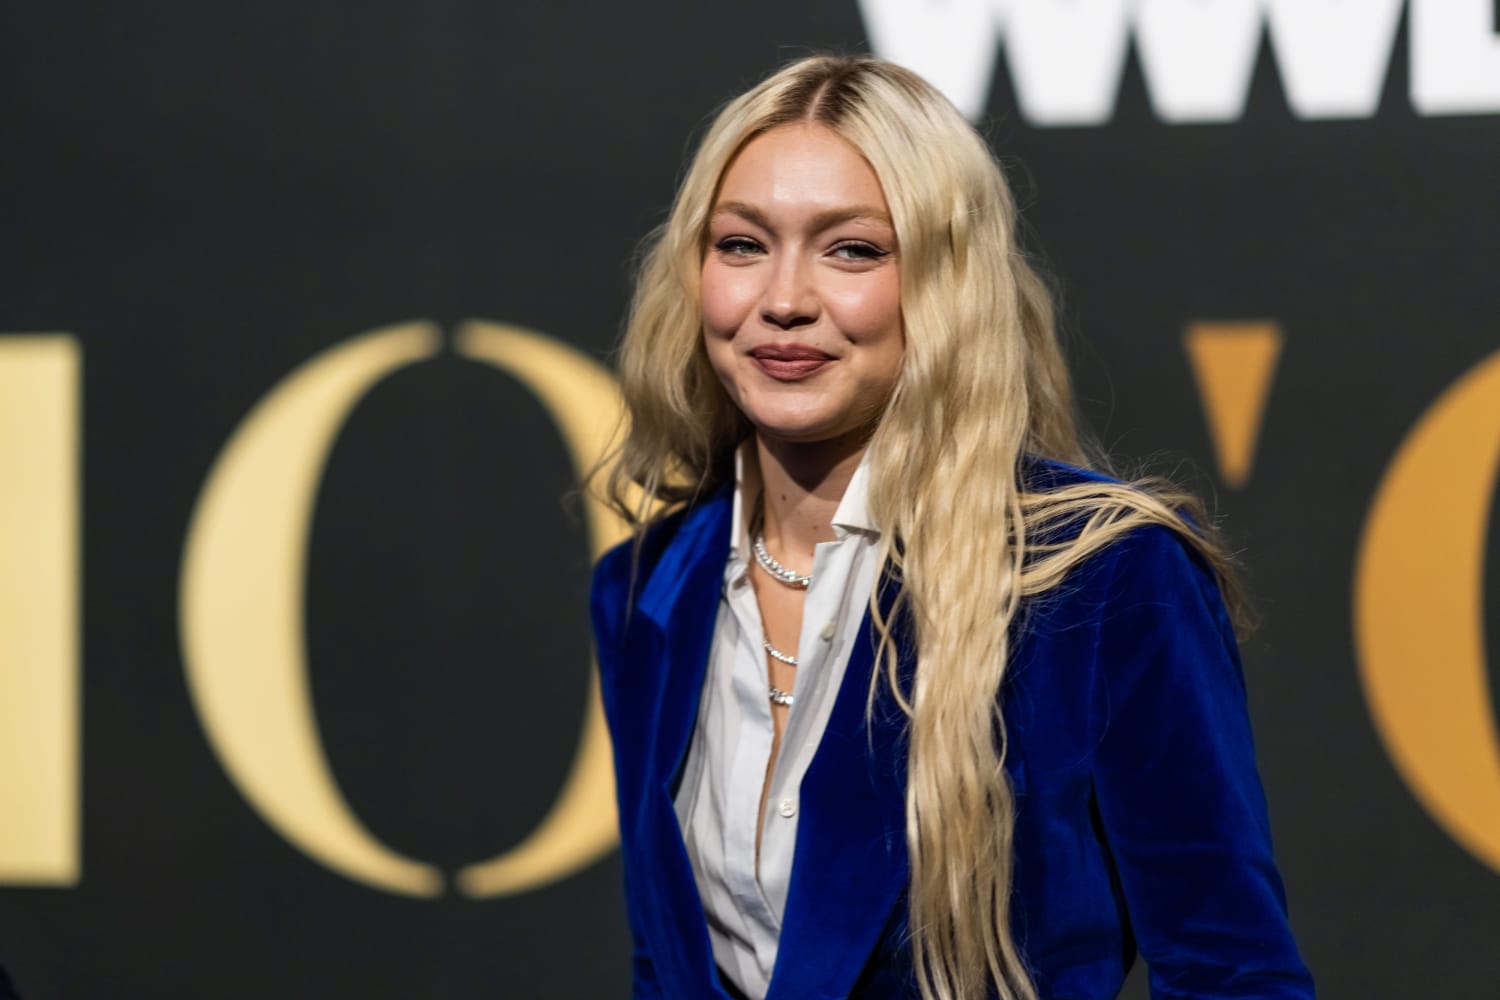 Gigi Hadid opens up on the blessings of being a 'Young Mum' and how she  co-parents with ex Zayn Malik